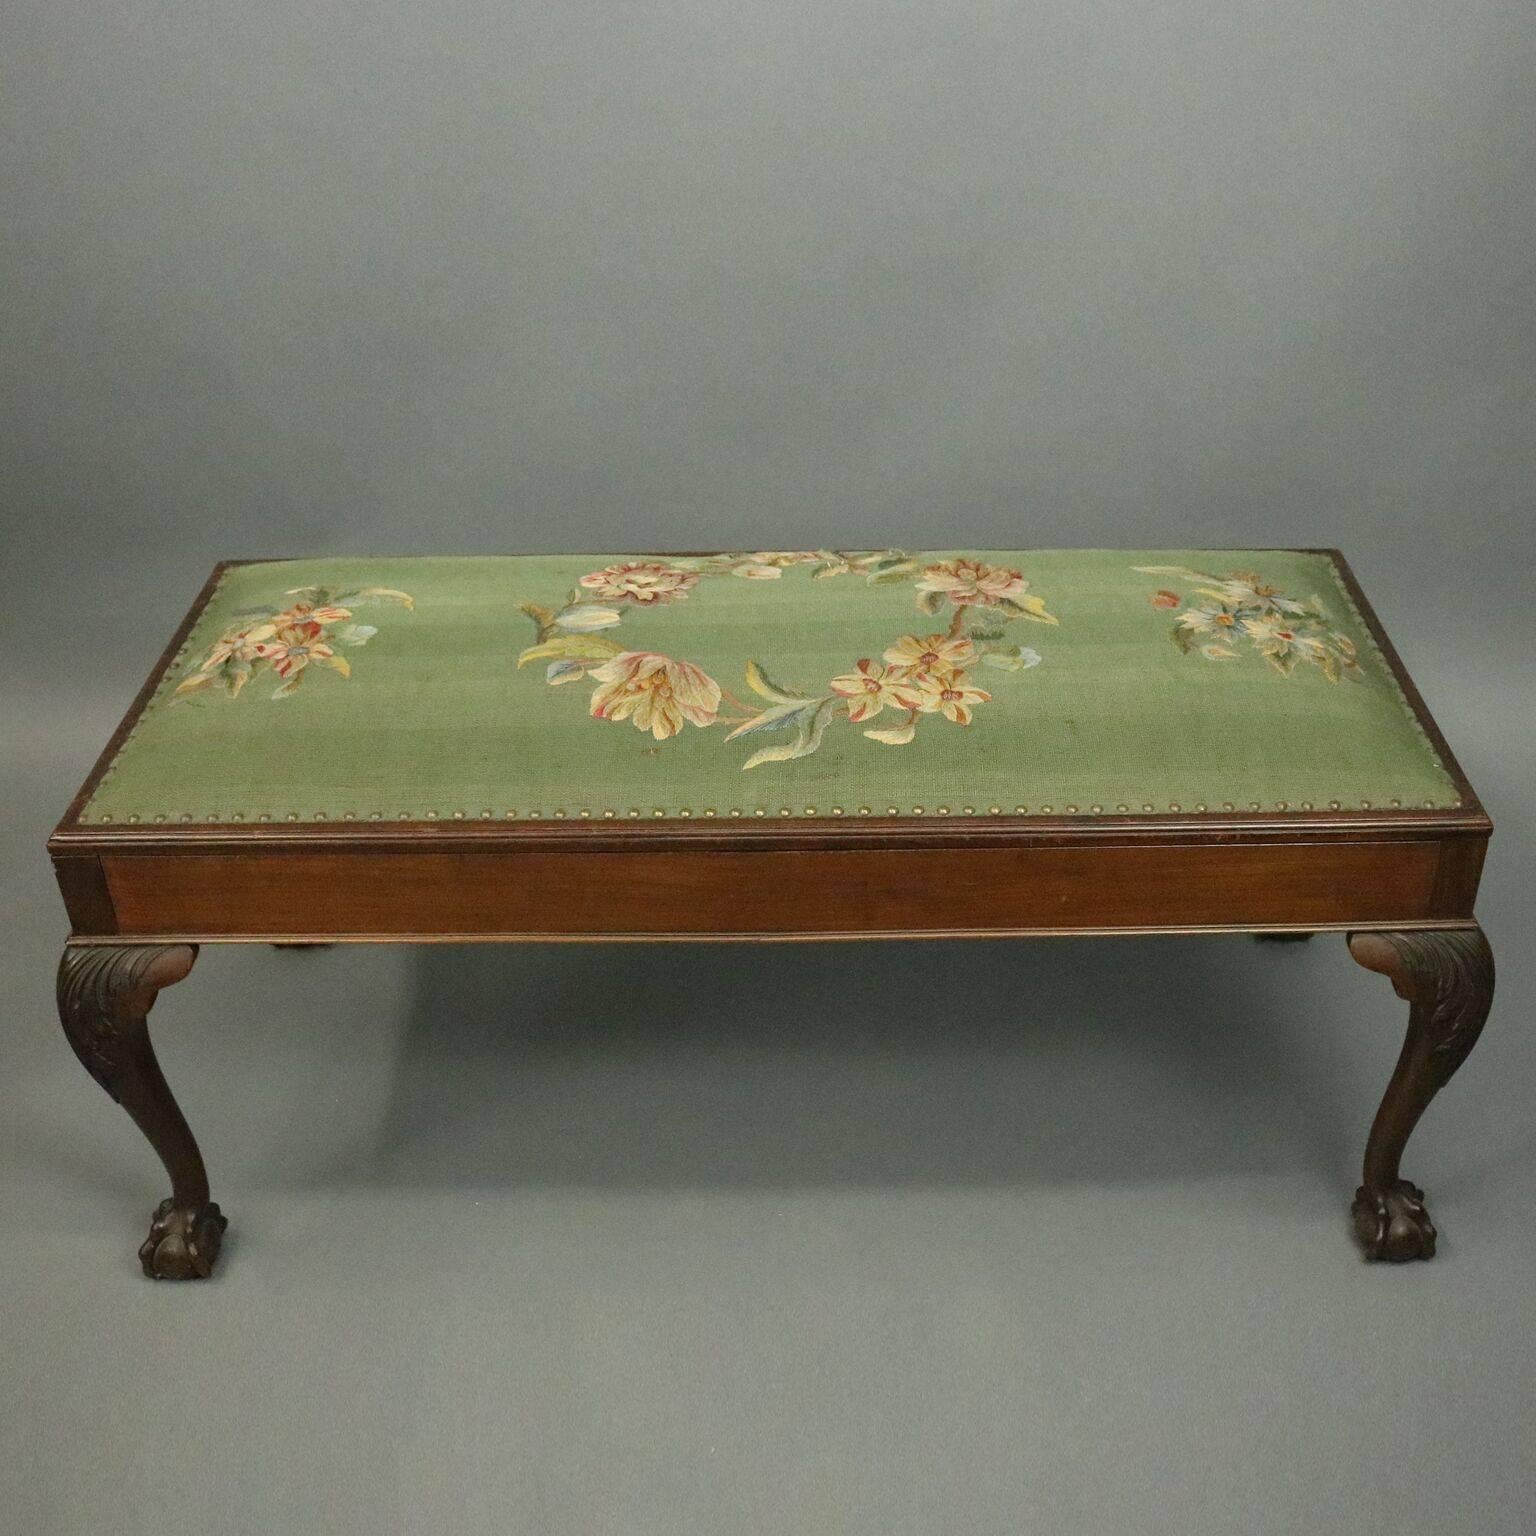 Antique Chippendale style lang bench features mahogany construction with cabriole legs with knees of carved acanthus leaves terminating in claw and ball feet, topped with floral needlepoint seat which opens to reveal an interior storage compartment,